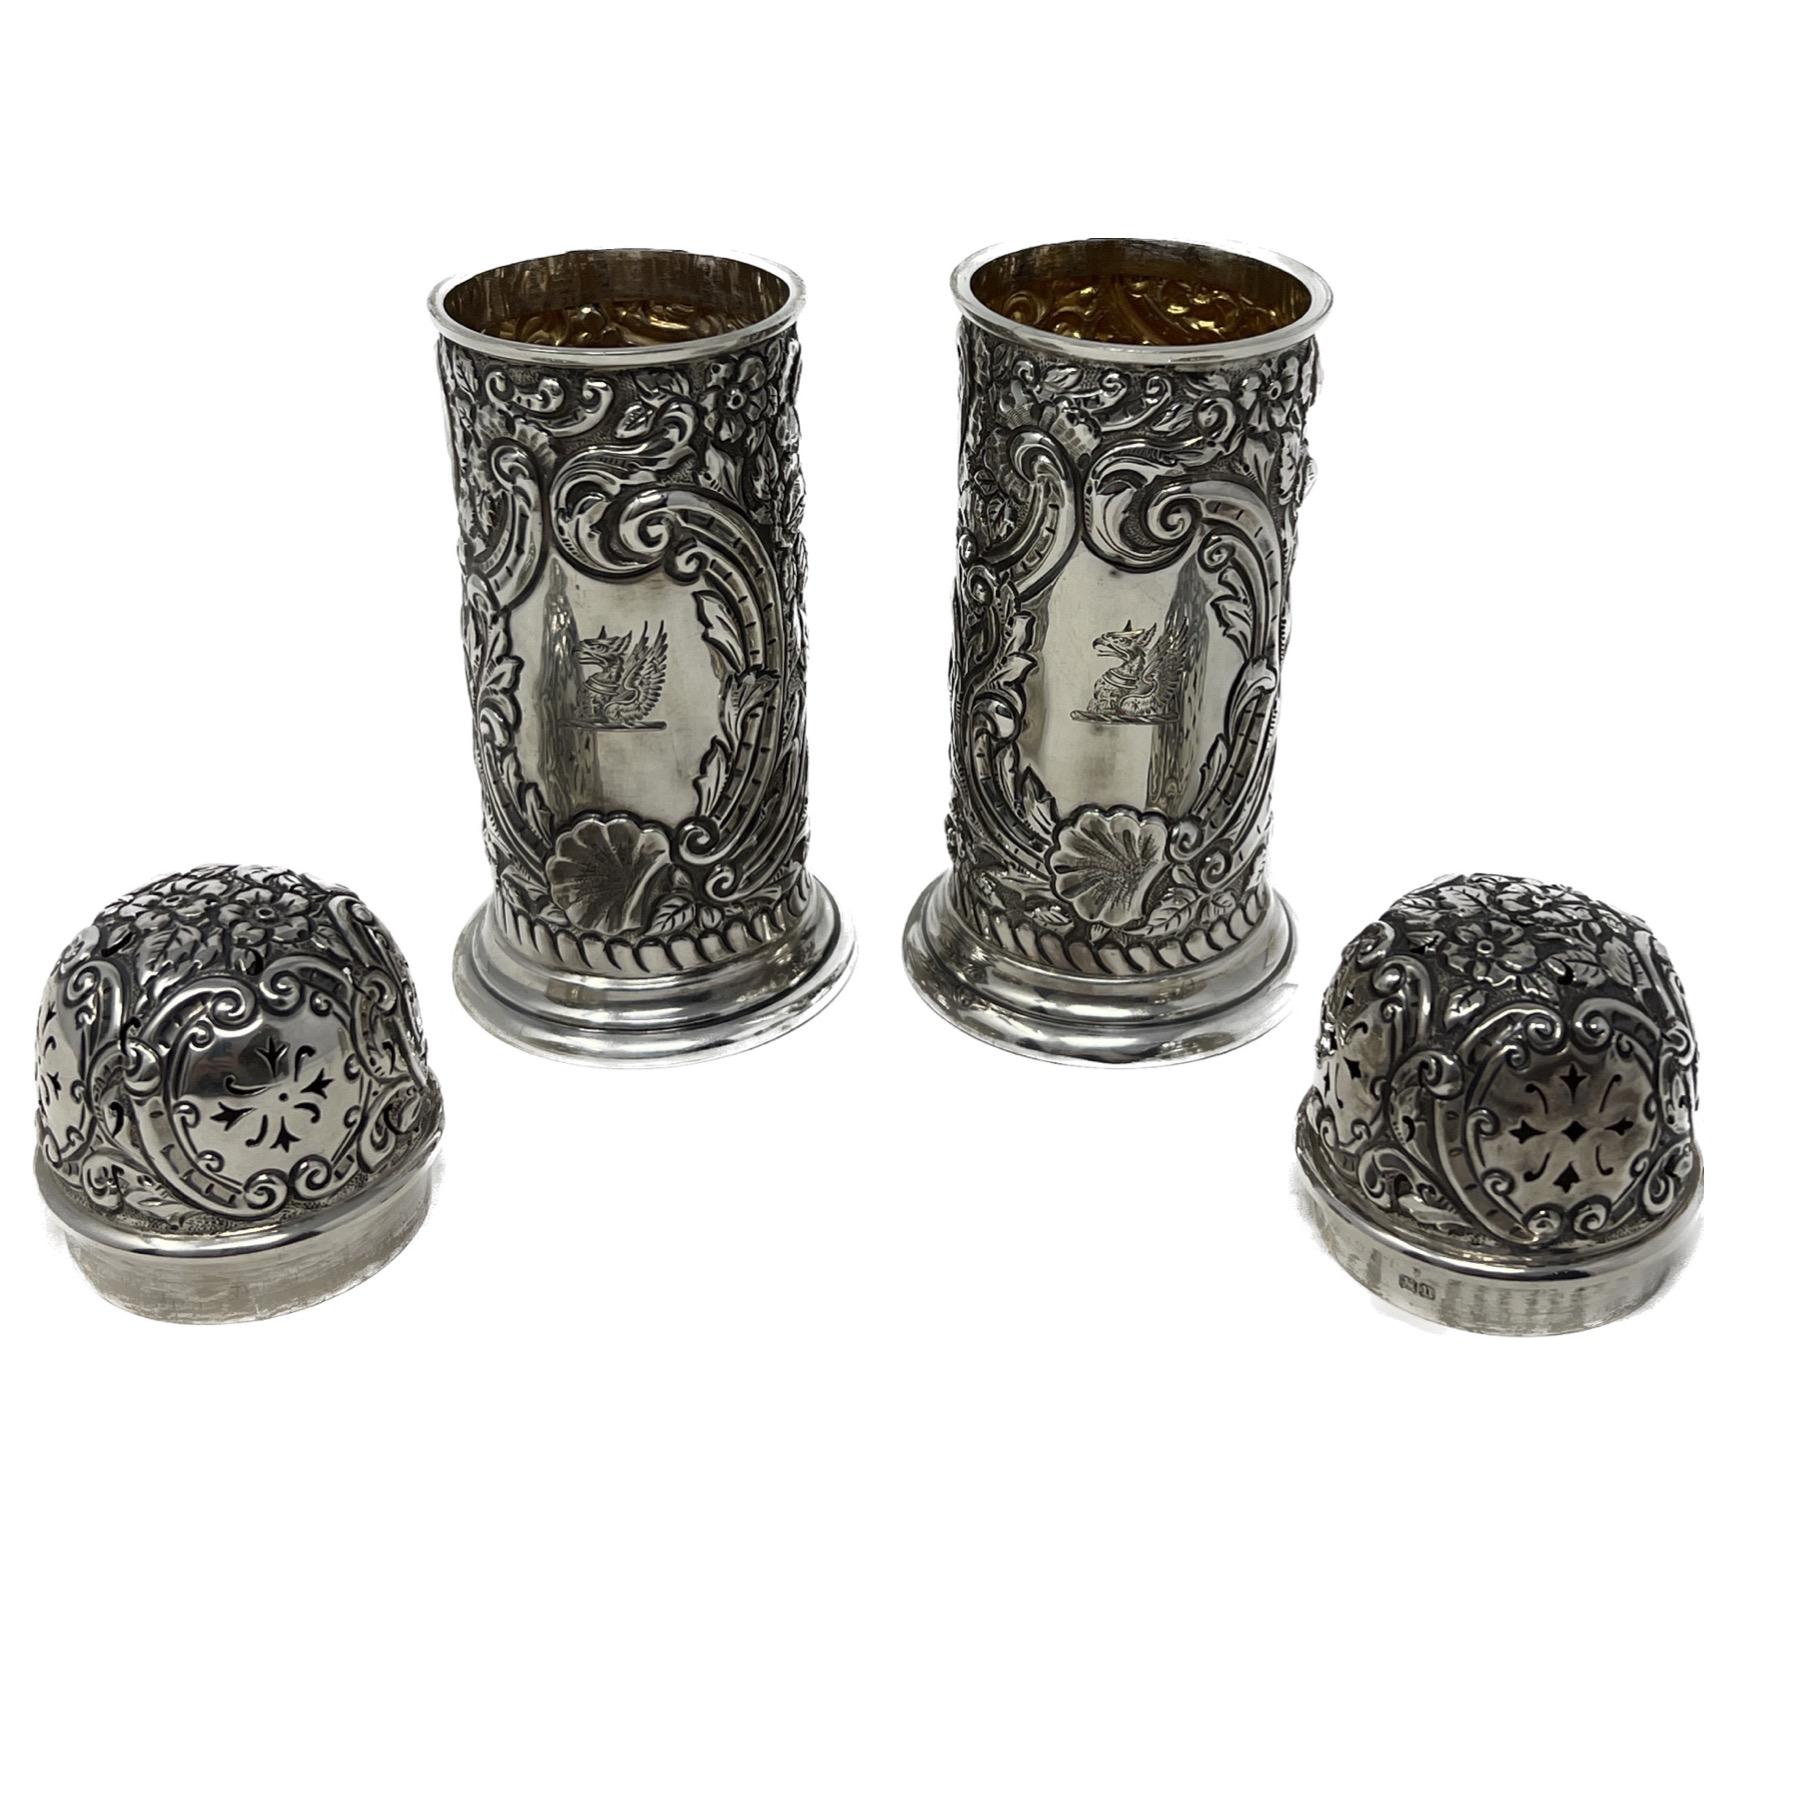 Pair Antique English Sterling Silver Muffineers or Salt & Pepper Shakers, Circa 1880.